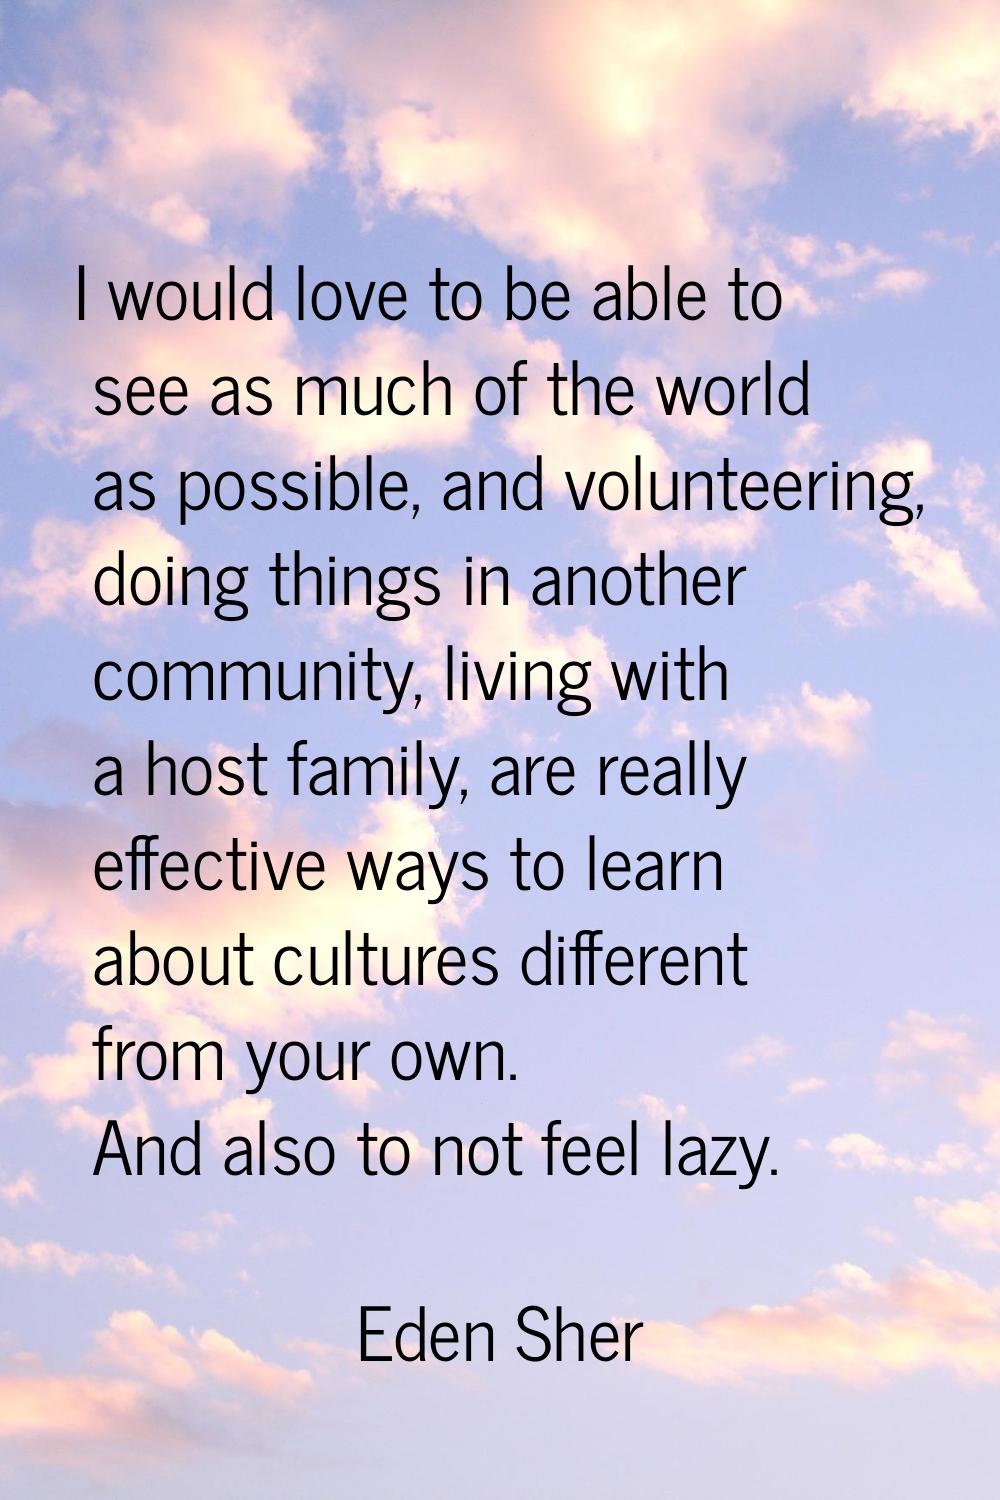 I would love to be able to see as much of the world as possible, and volunteering, doing things in 